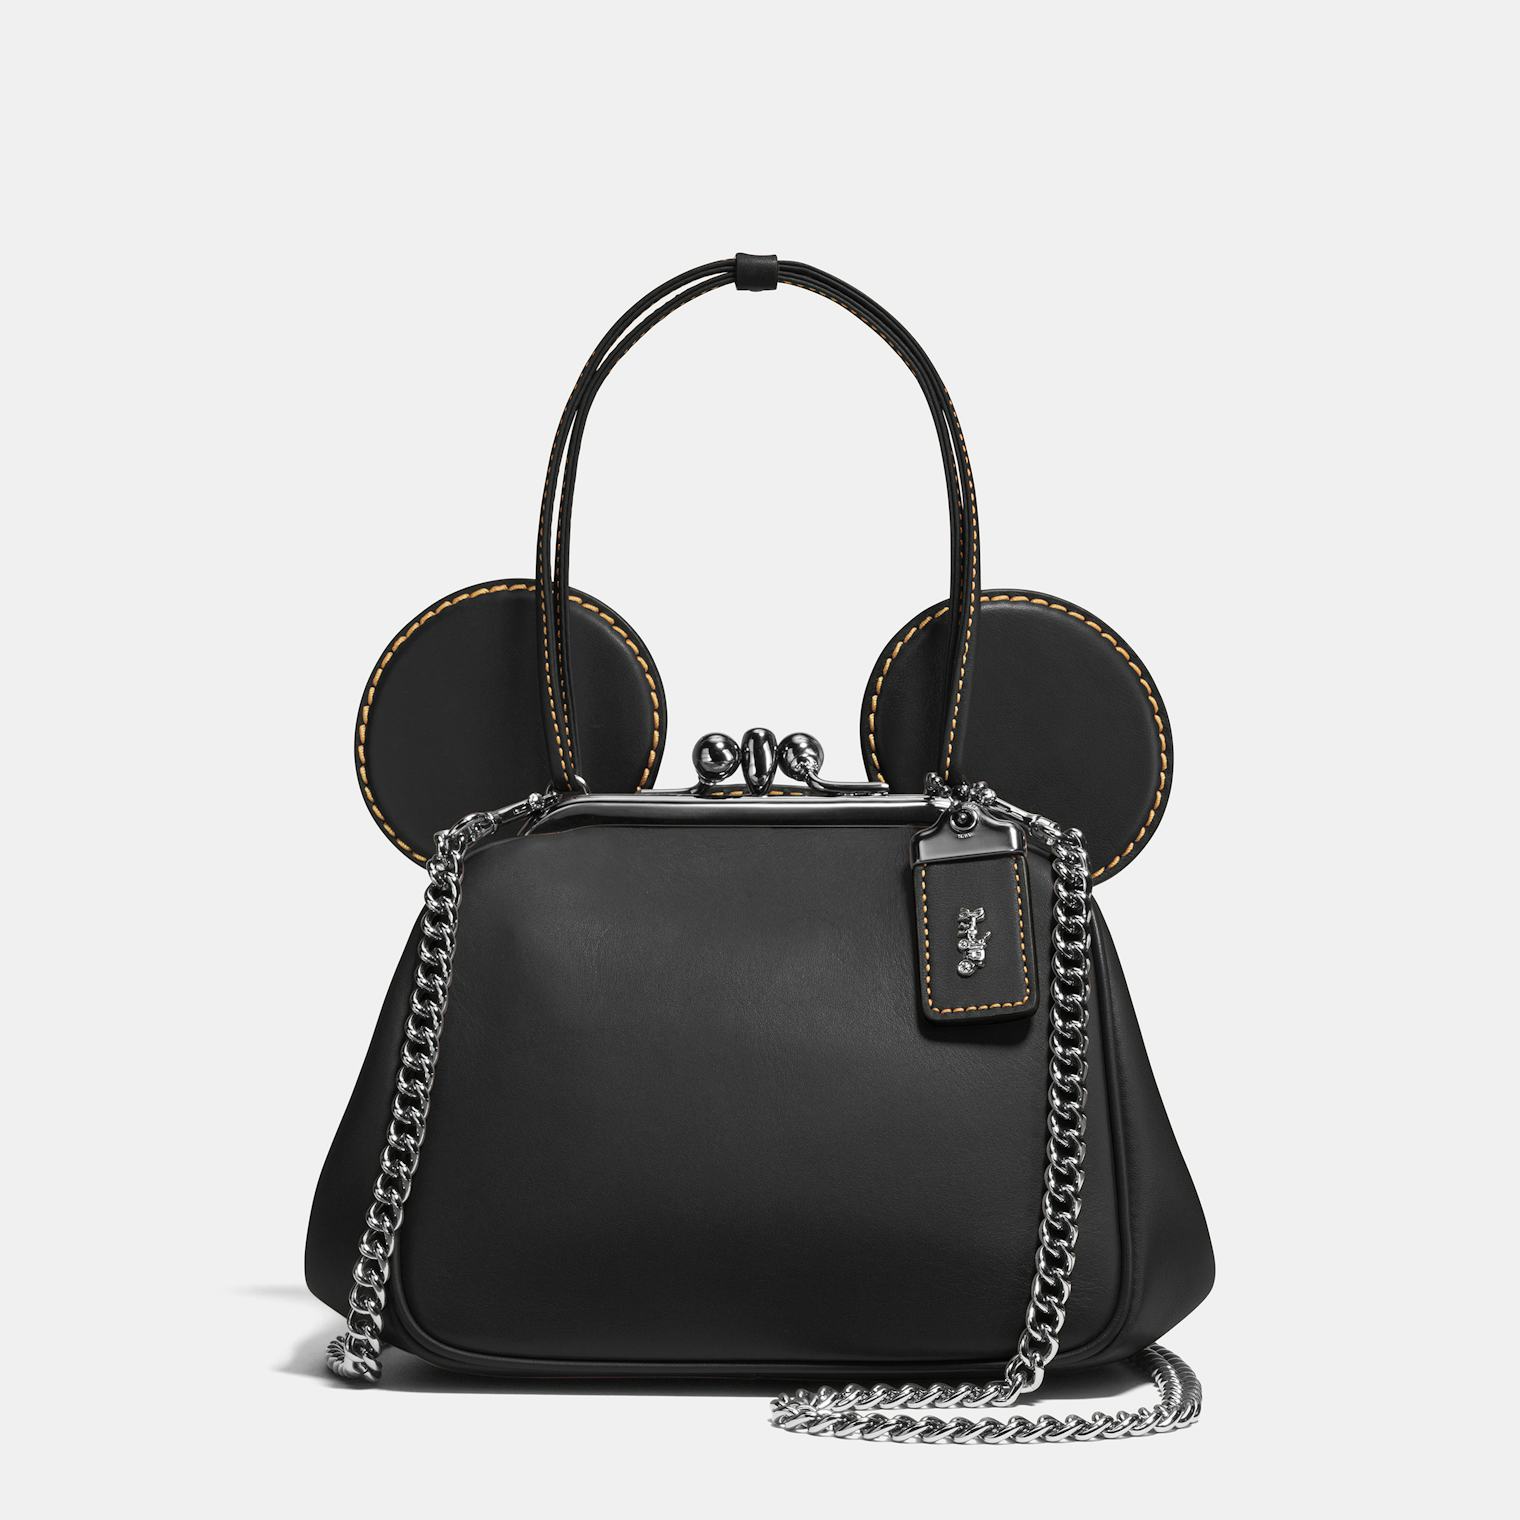 Where To Buy The Disney x Coach Collaboration If You're A Diehard ...